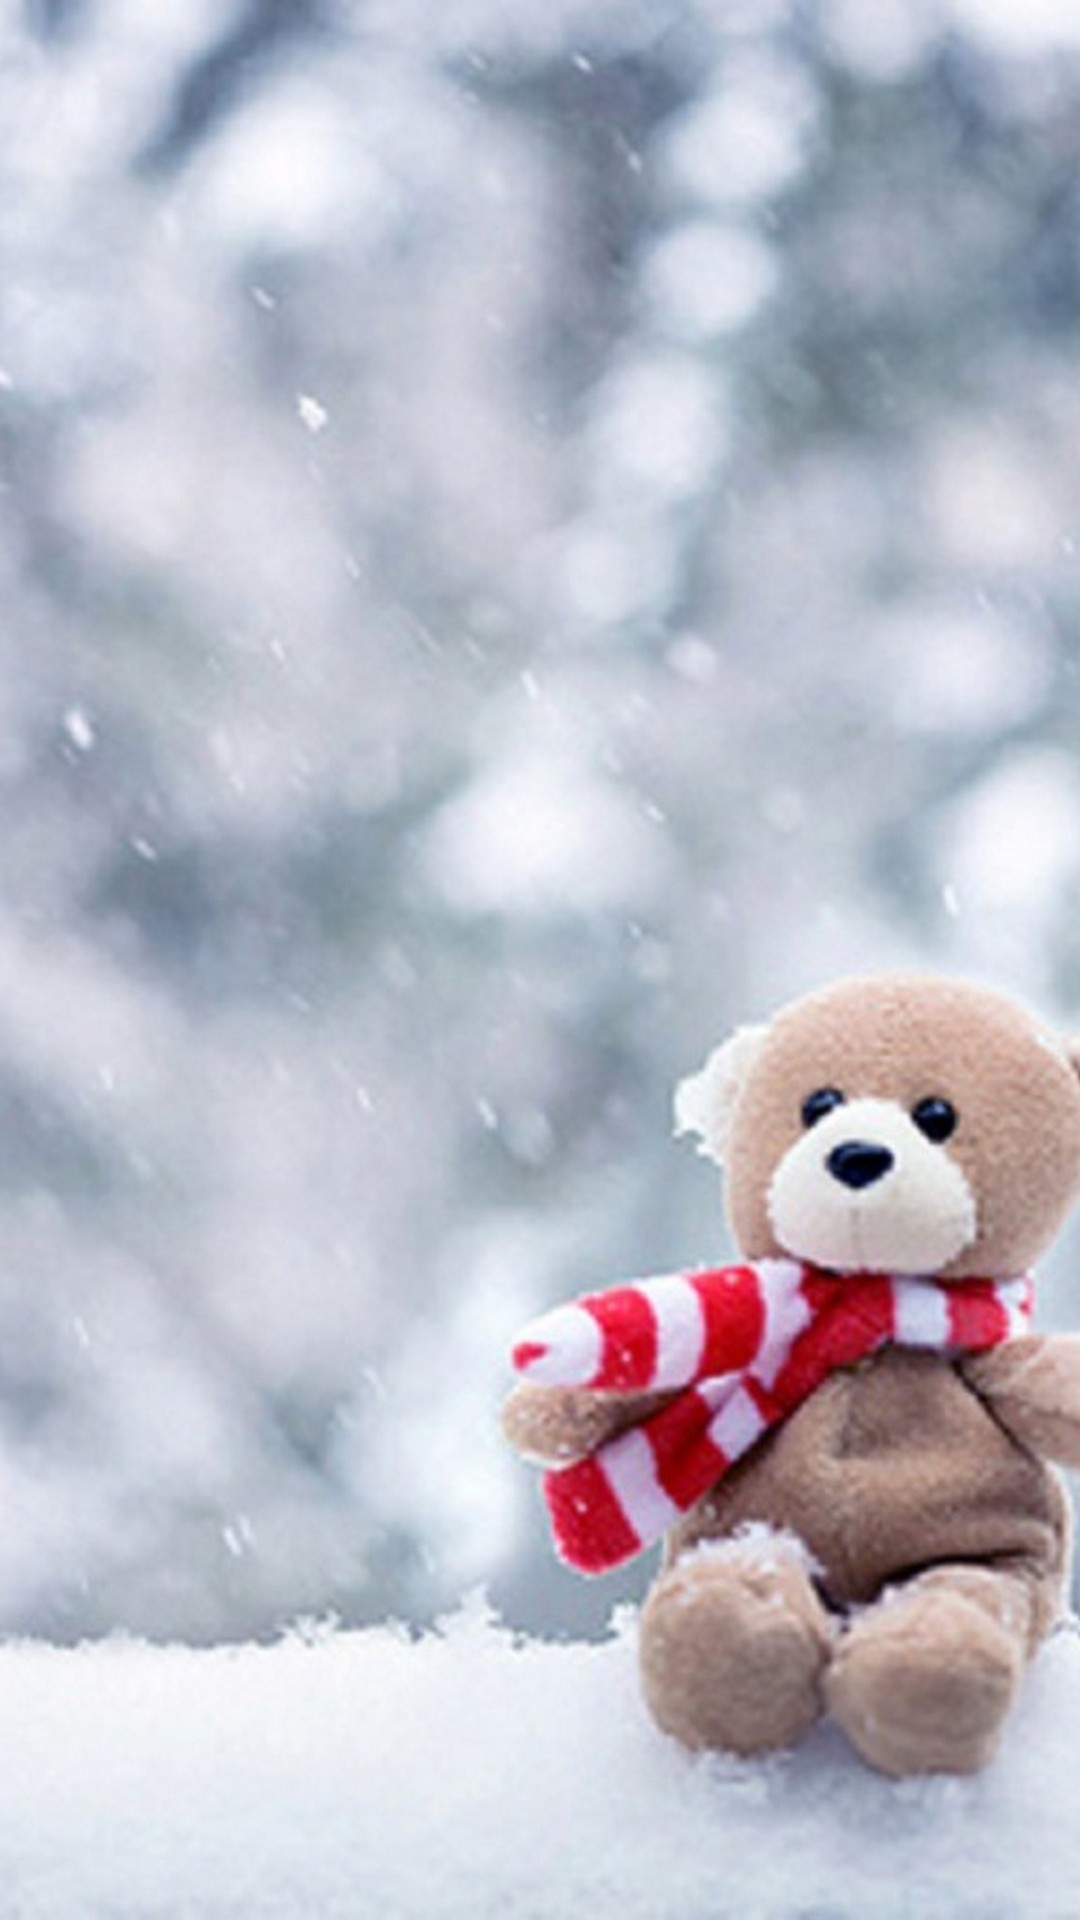 Cute Teddy Bear Wallpaper Iphone Hd With Image Resolution - Cute Wallpaper Teddy Bear - HD Wallpaper 